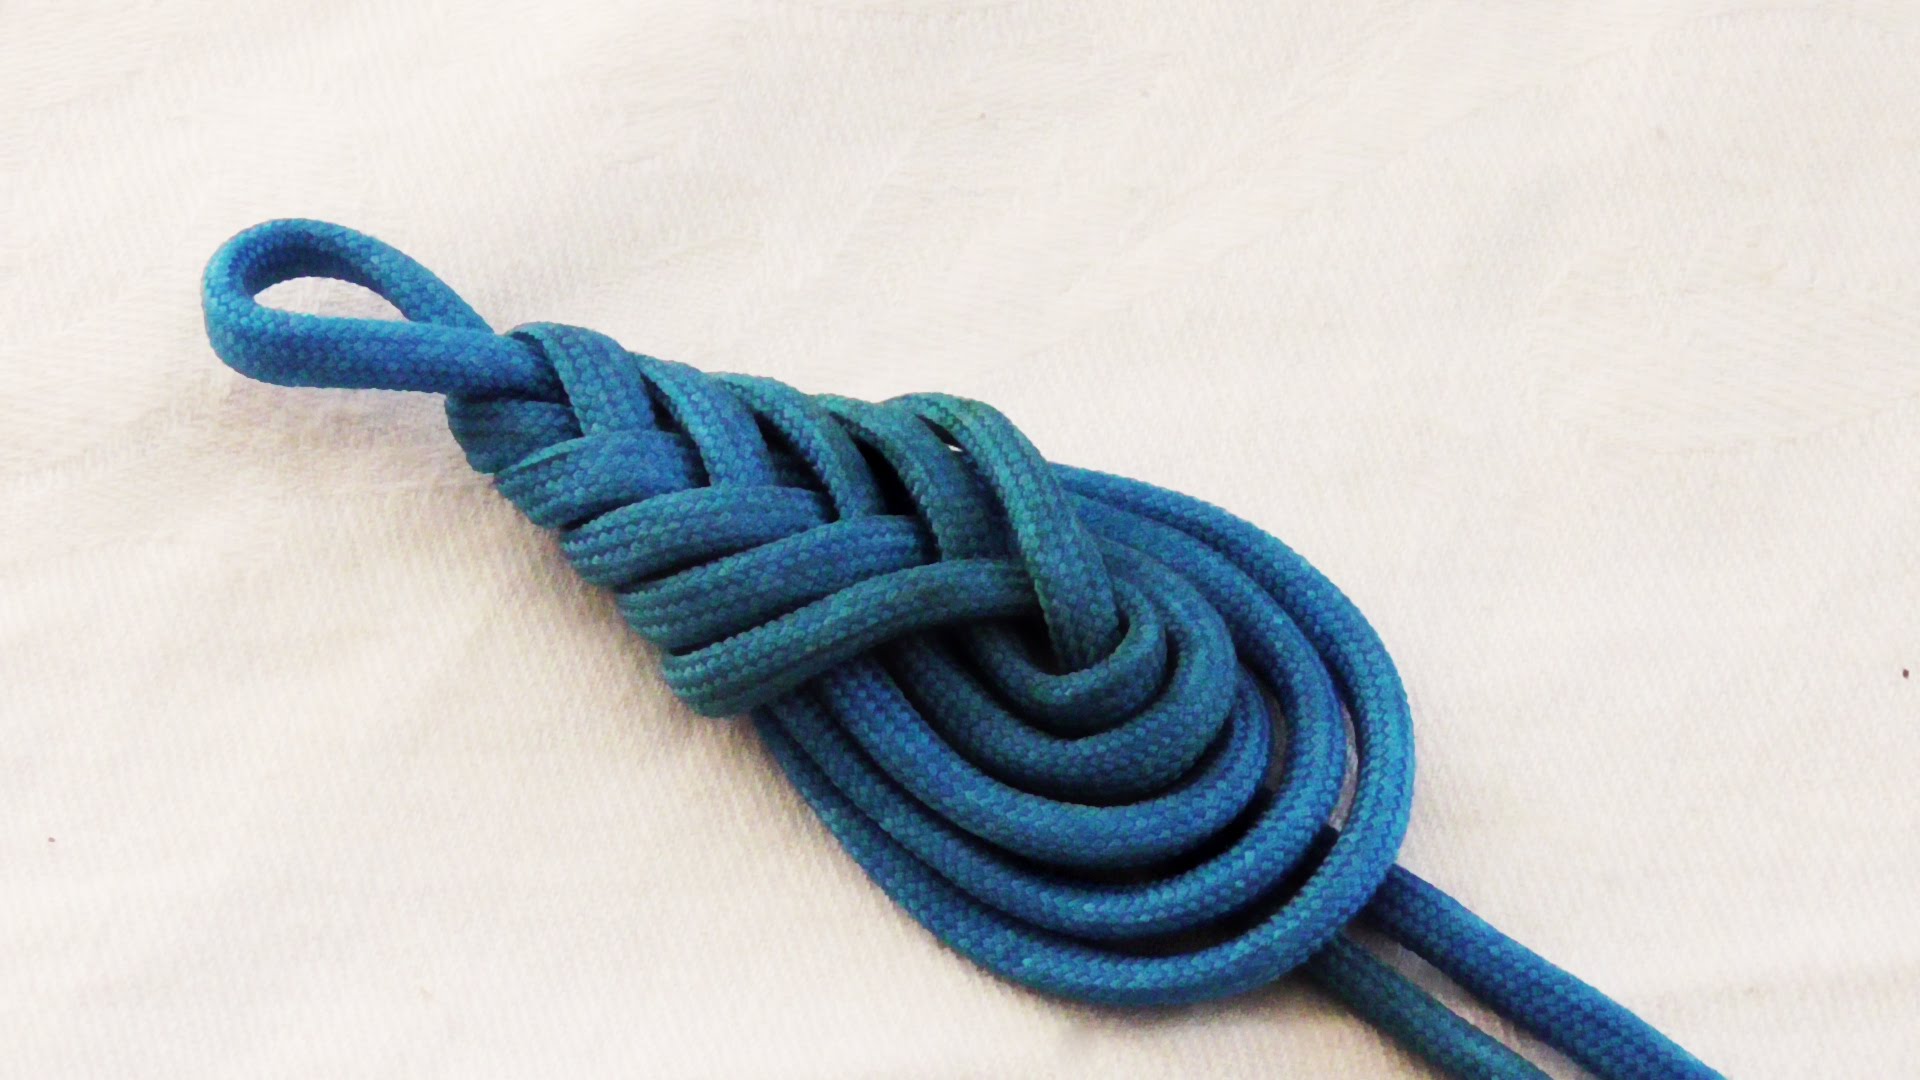 Learn How To Tie A Decorative Paracord Teardrop Knot/Pipa Knot - YouTube